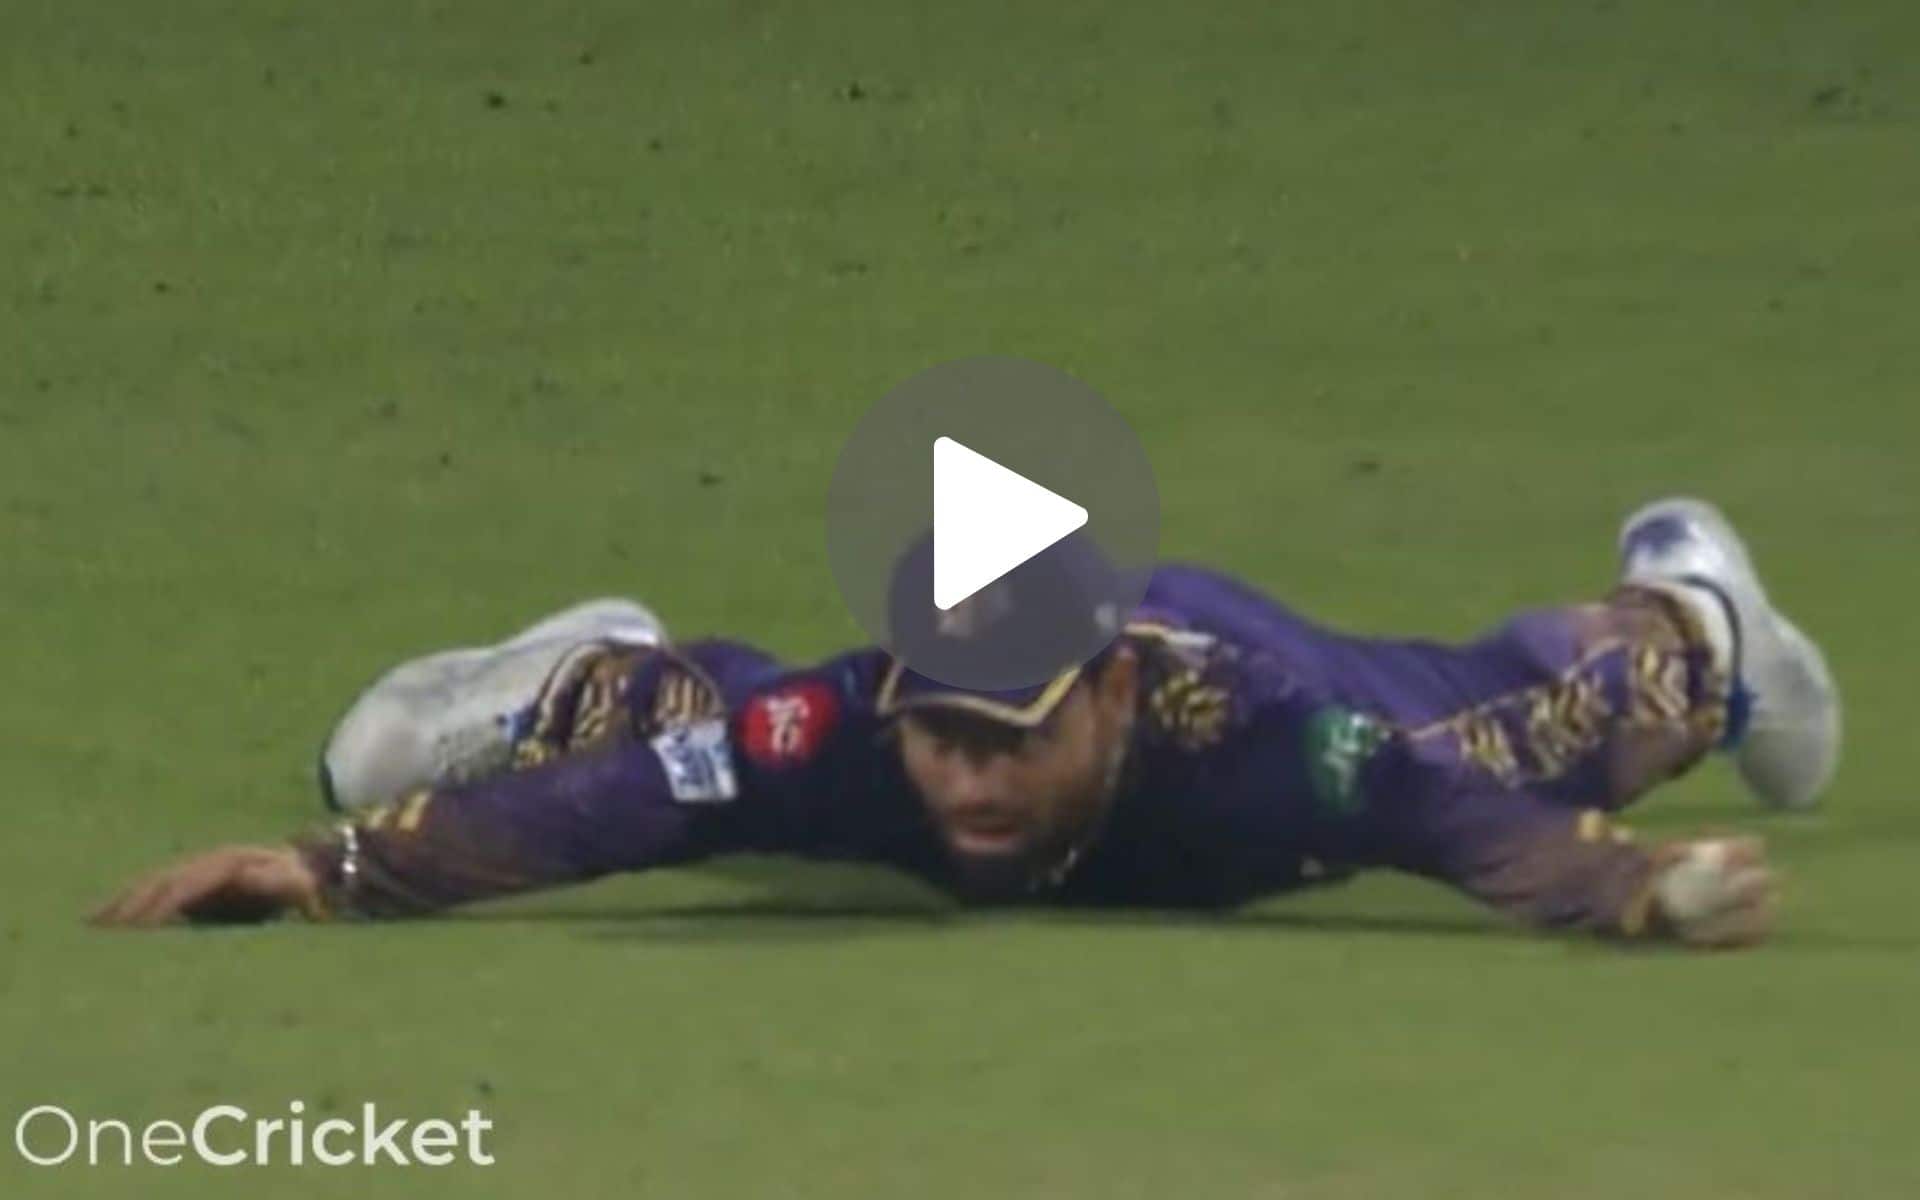 [Watch] Rinku Singh's 'Swimming' Catch Sends Aiden Markram Back To The Shore